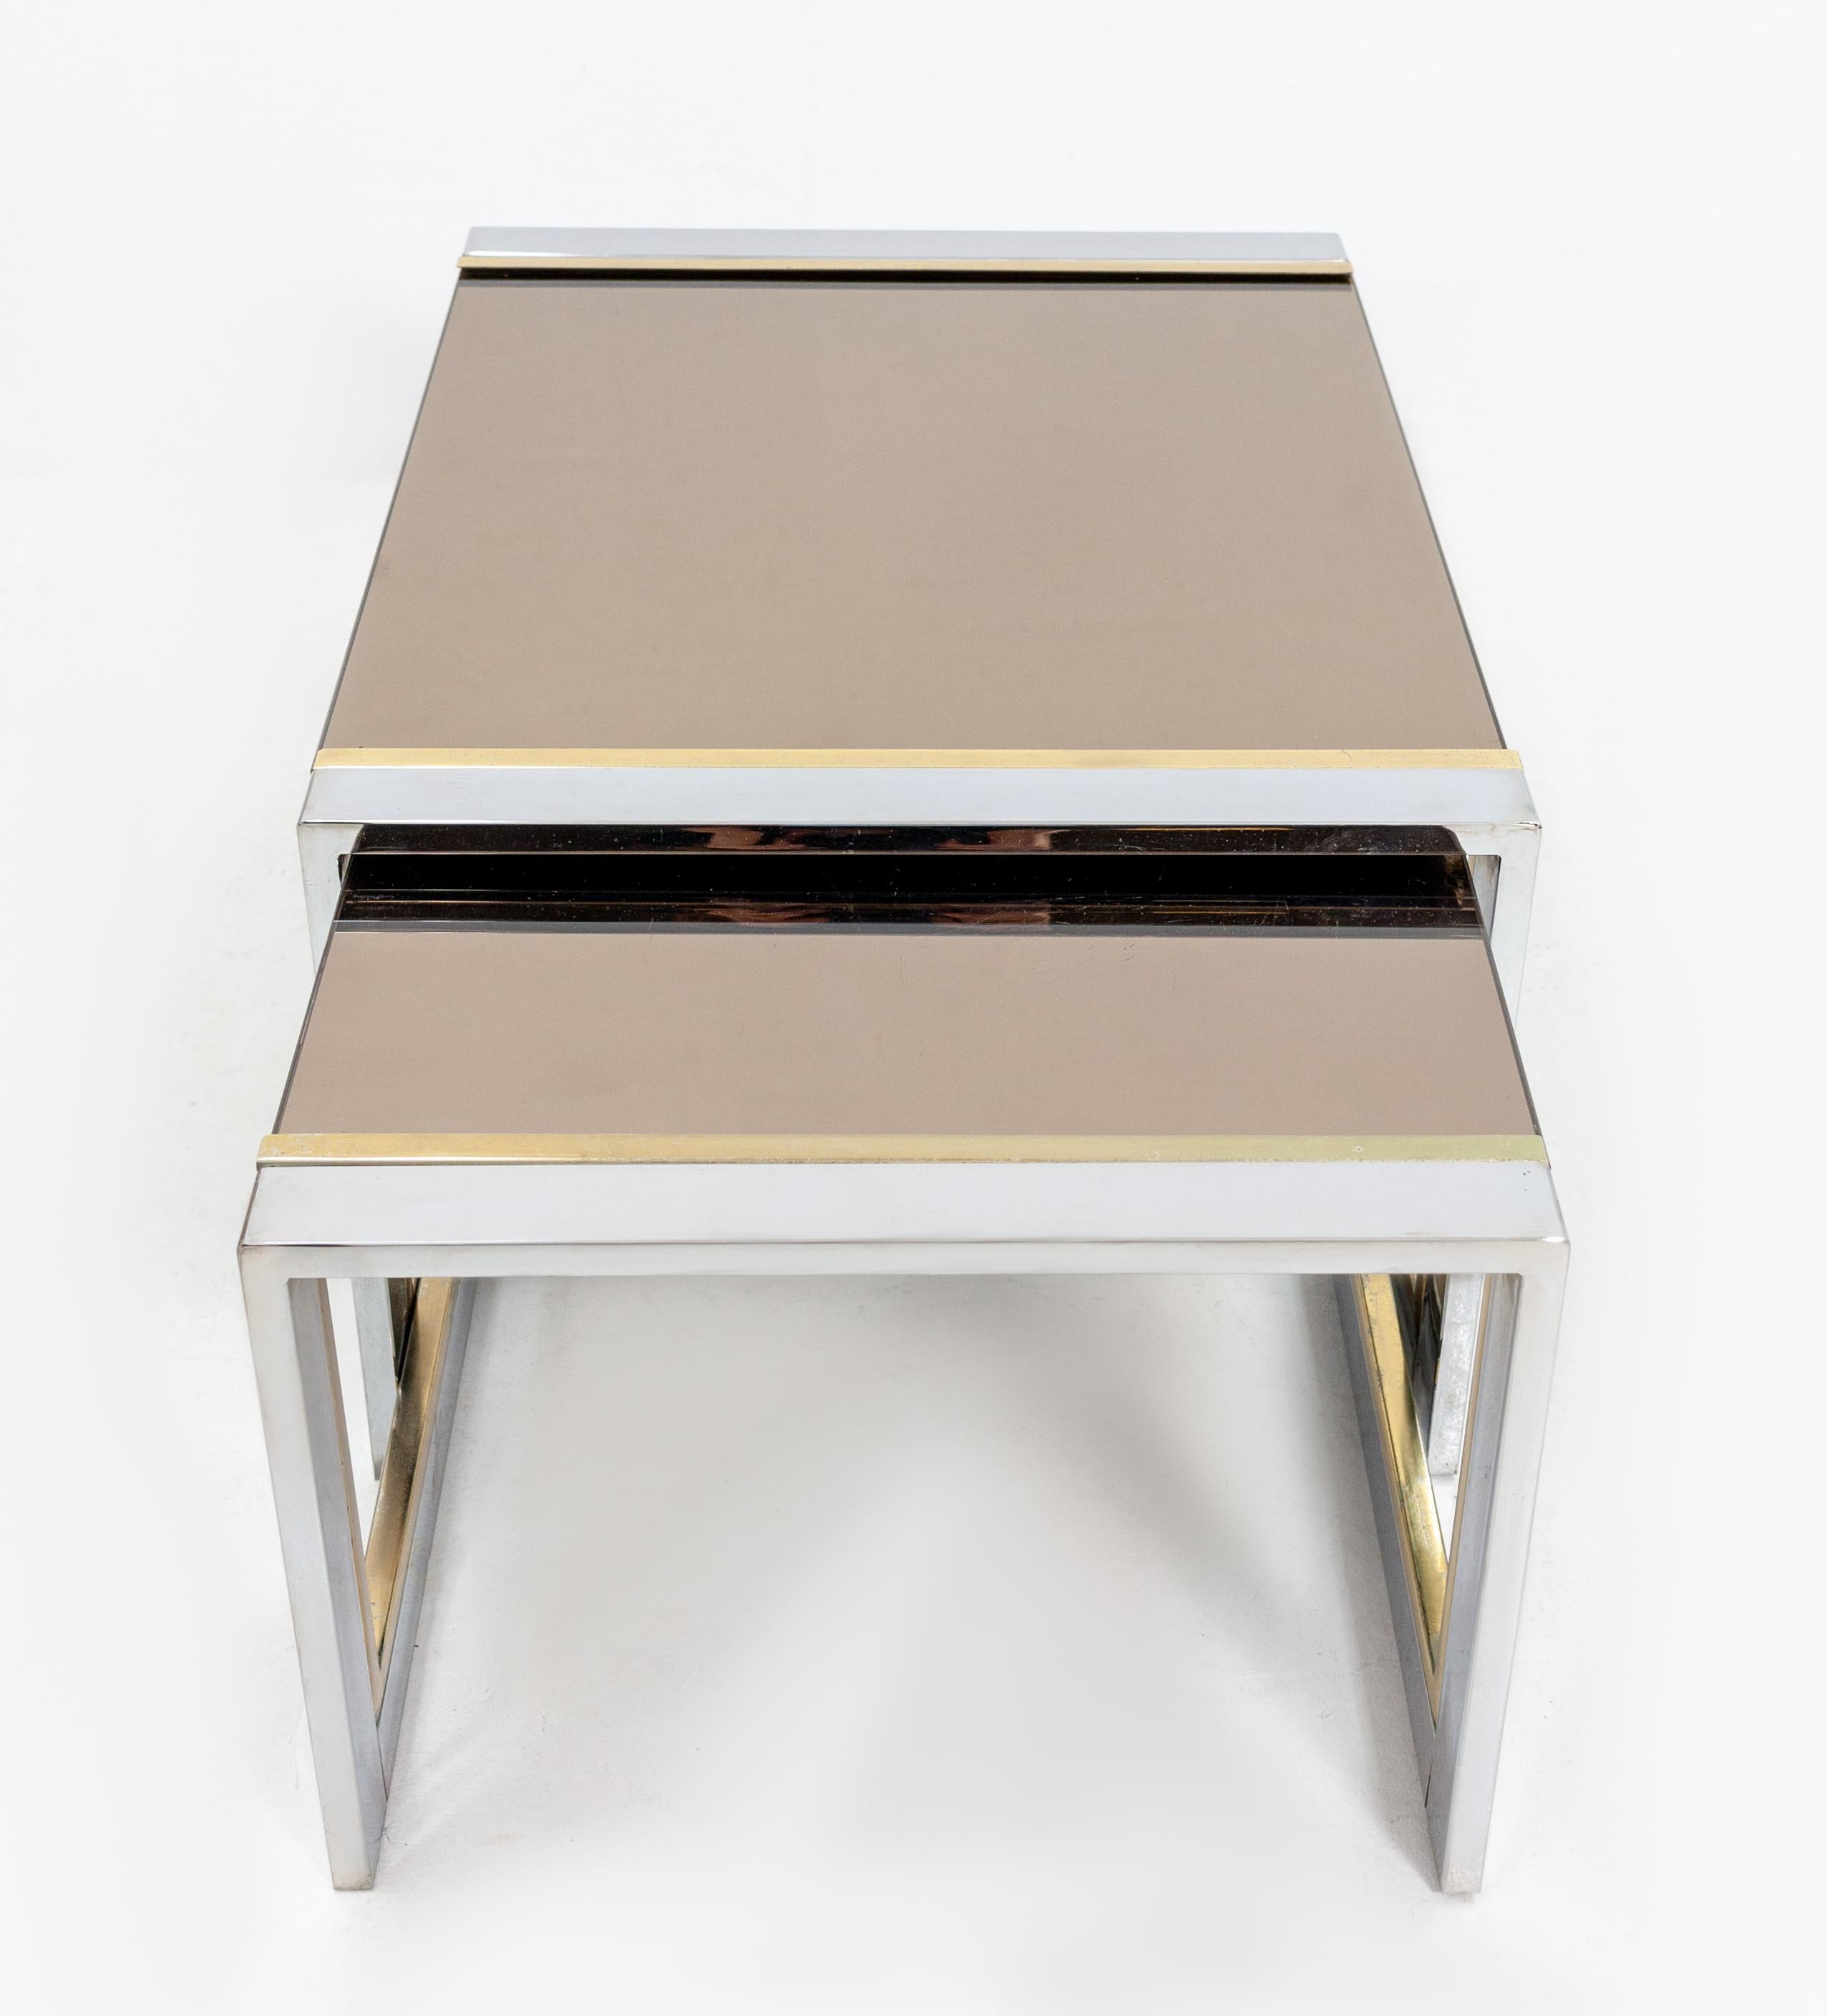 Lovely design by Willy Rizzo Italian designer. 1970s, two side tables. Made off polished steel and brass,

With the original smoked mirror glass. Very stylish tables. Good condition.




Measures: Height 33 cm, width 59 cm, depth 46 